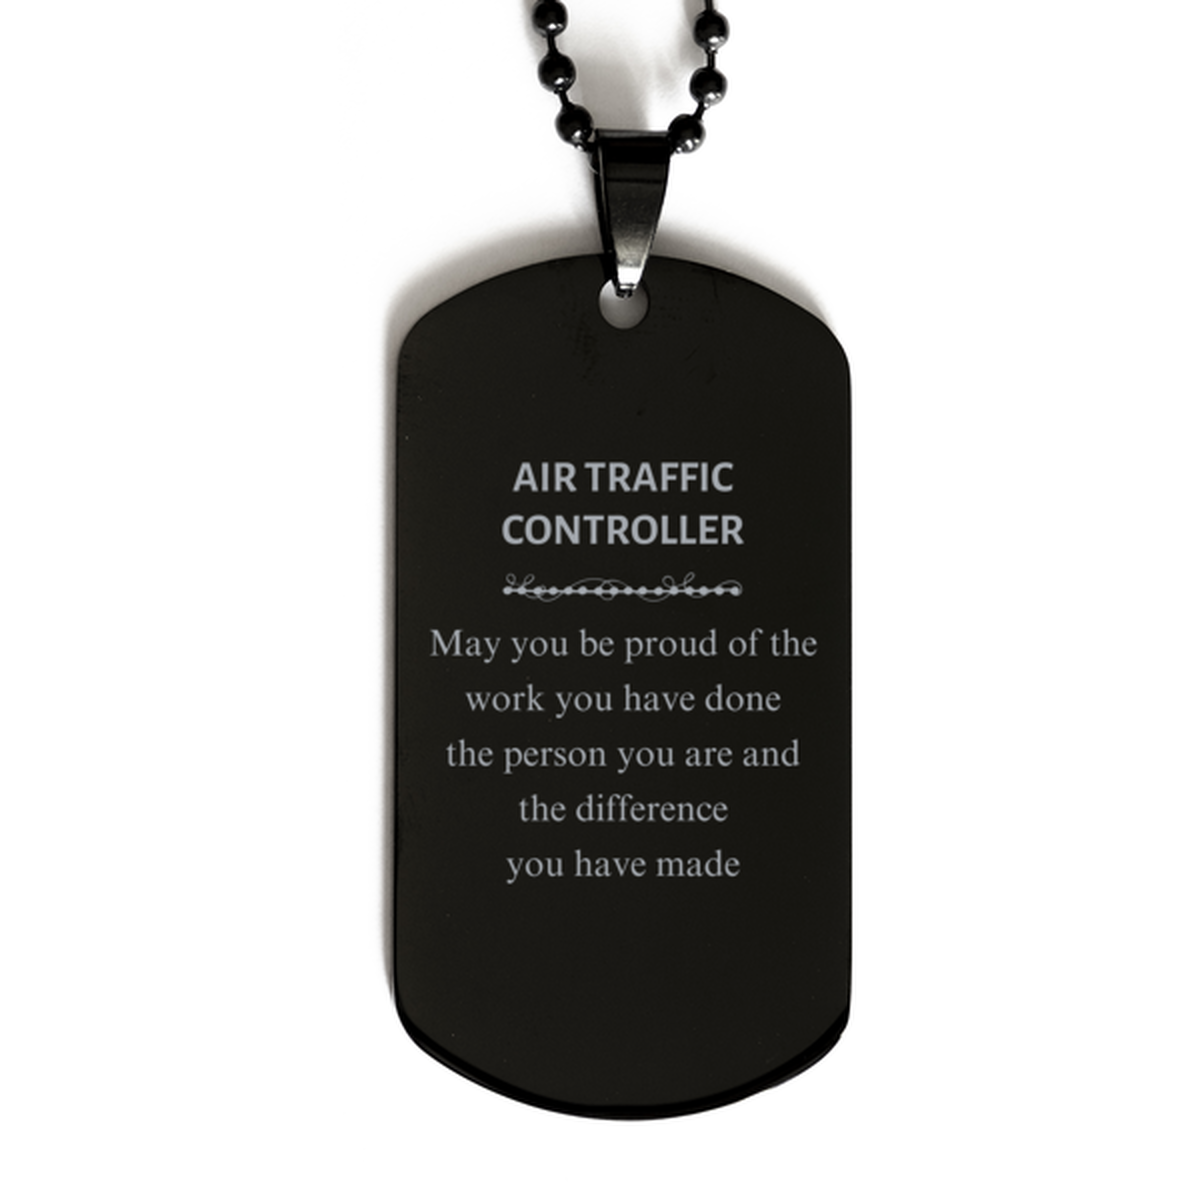 Air Traffic Controller May you be proud of the work you have done, Retirement Air Traffic Controller Black Dog Tag for Colleague Appreciation Gifts Amazing for Air Traffic Controller